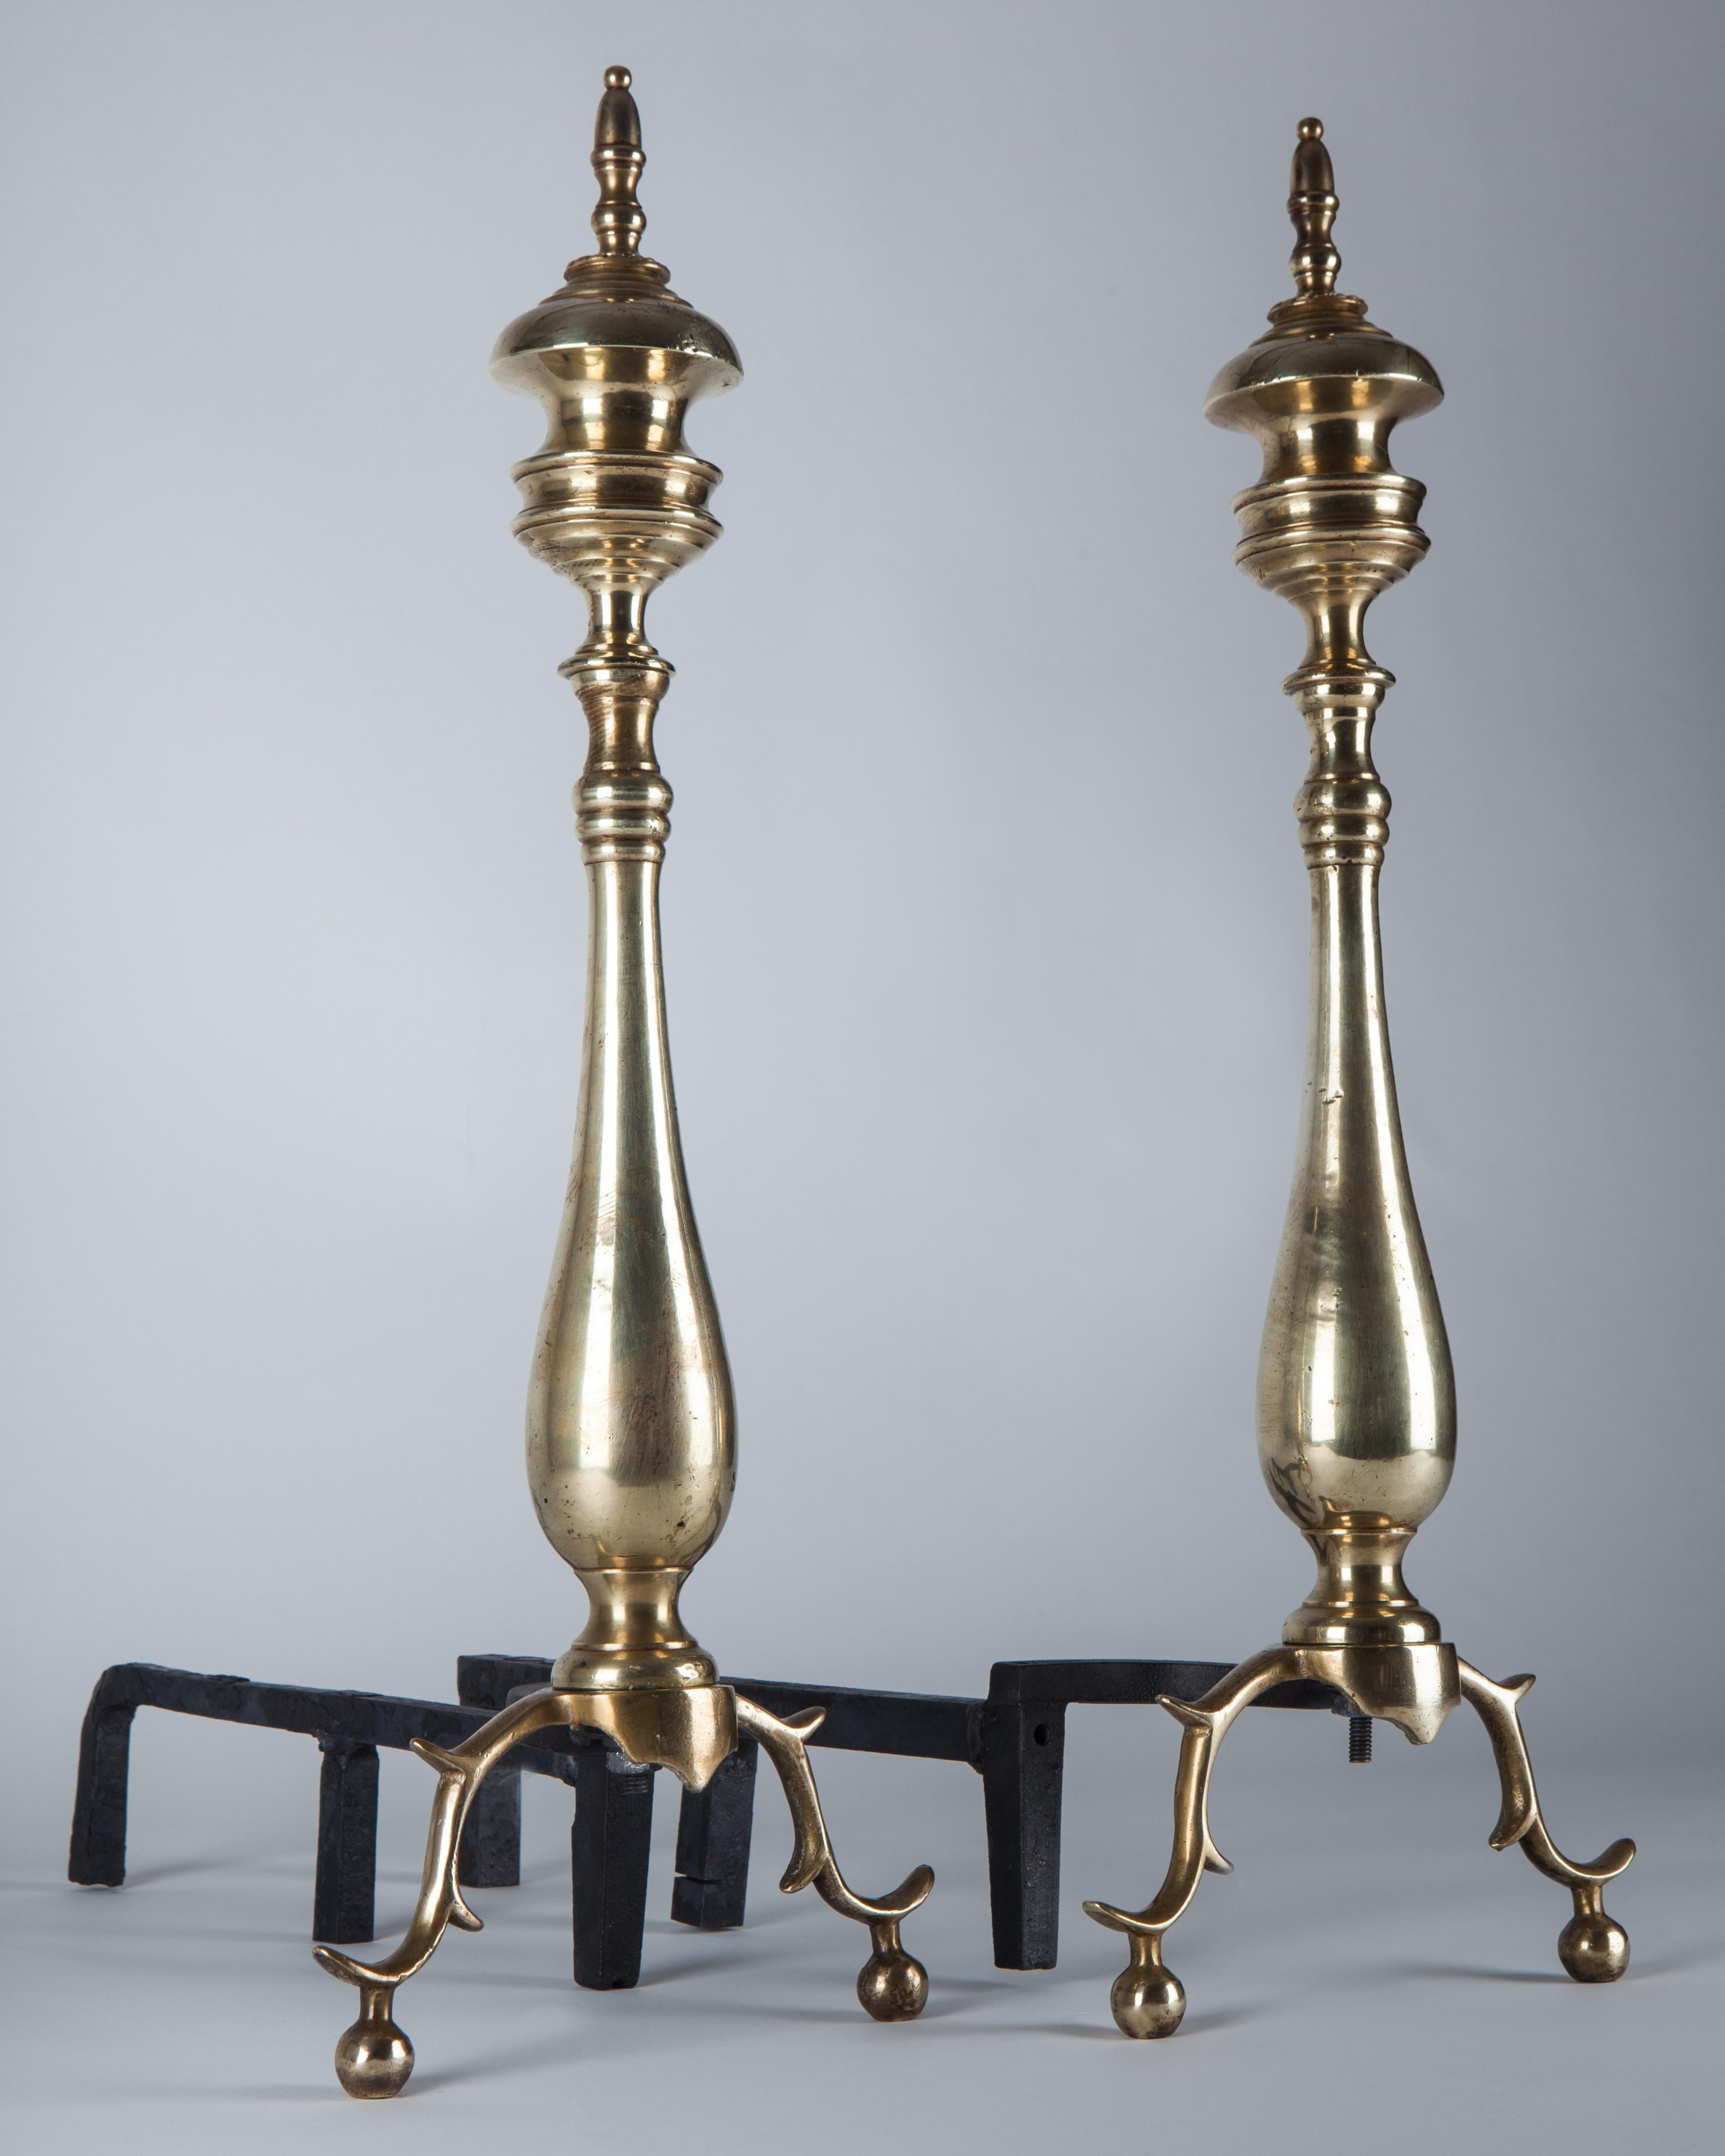 American Classical Antique Pair of Brass Baluster Turned Andirons with Cast Legs, circa 1920